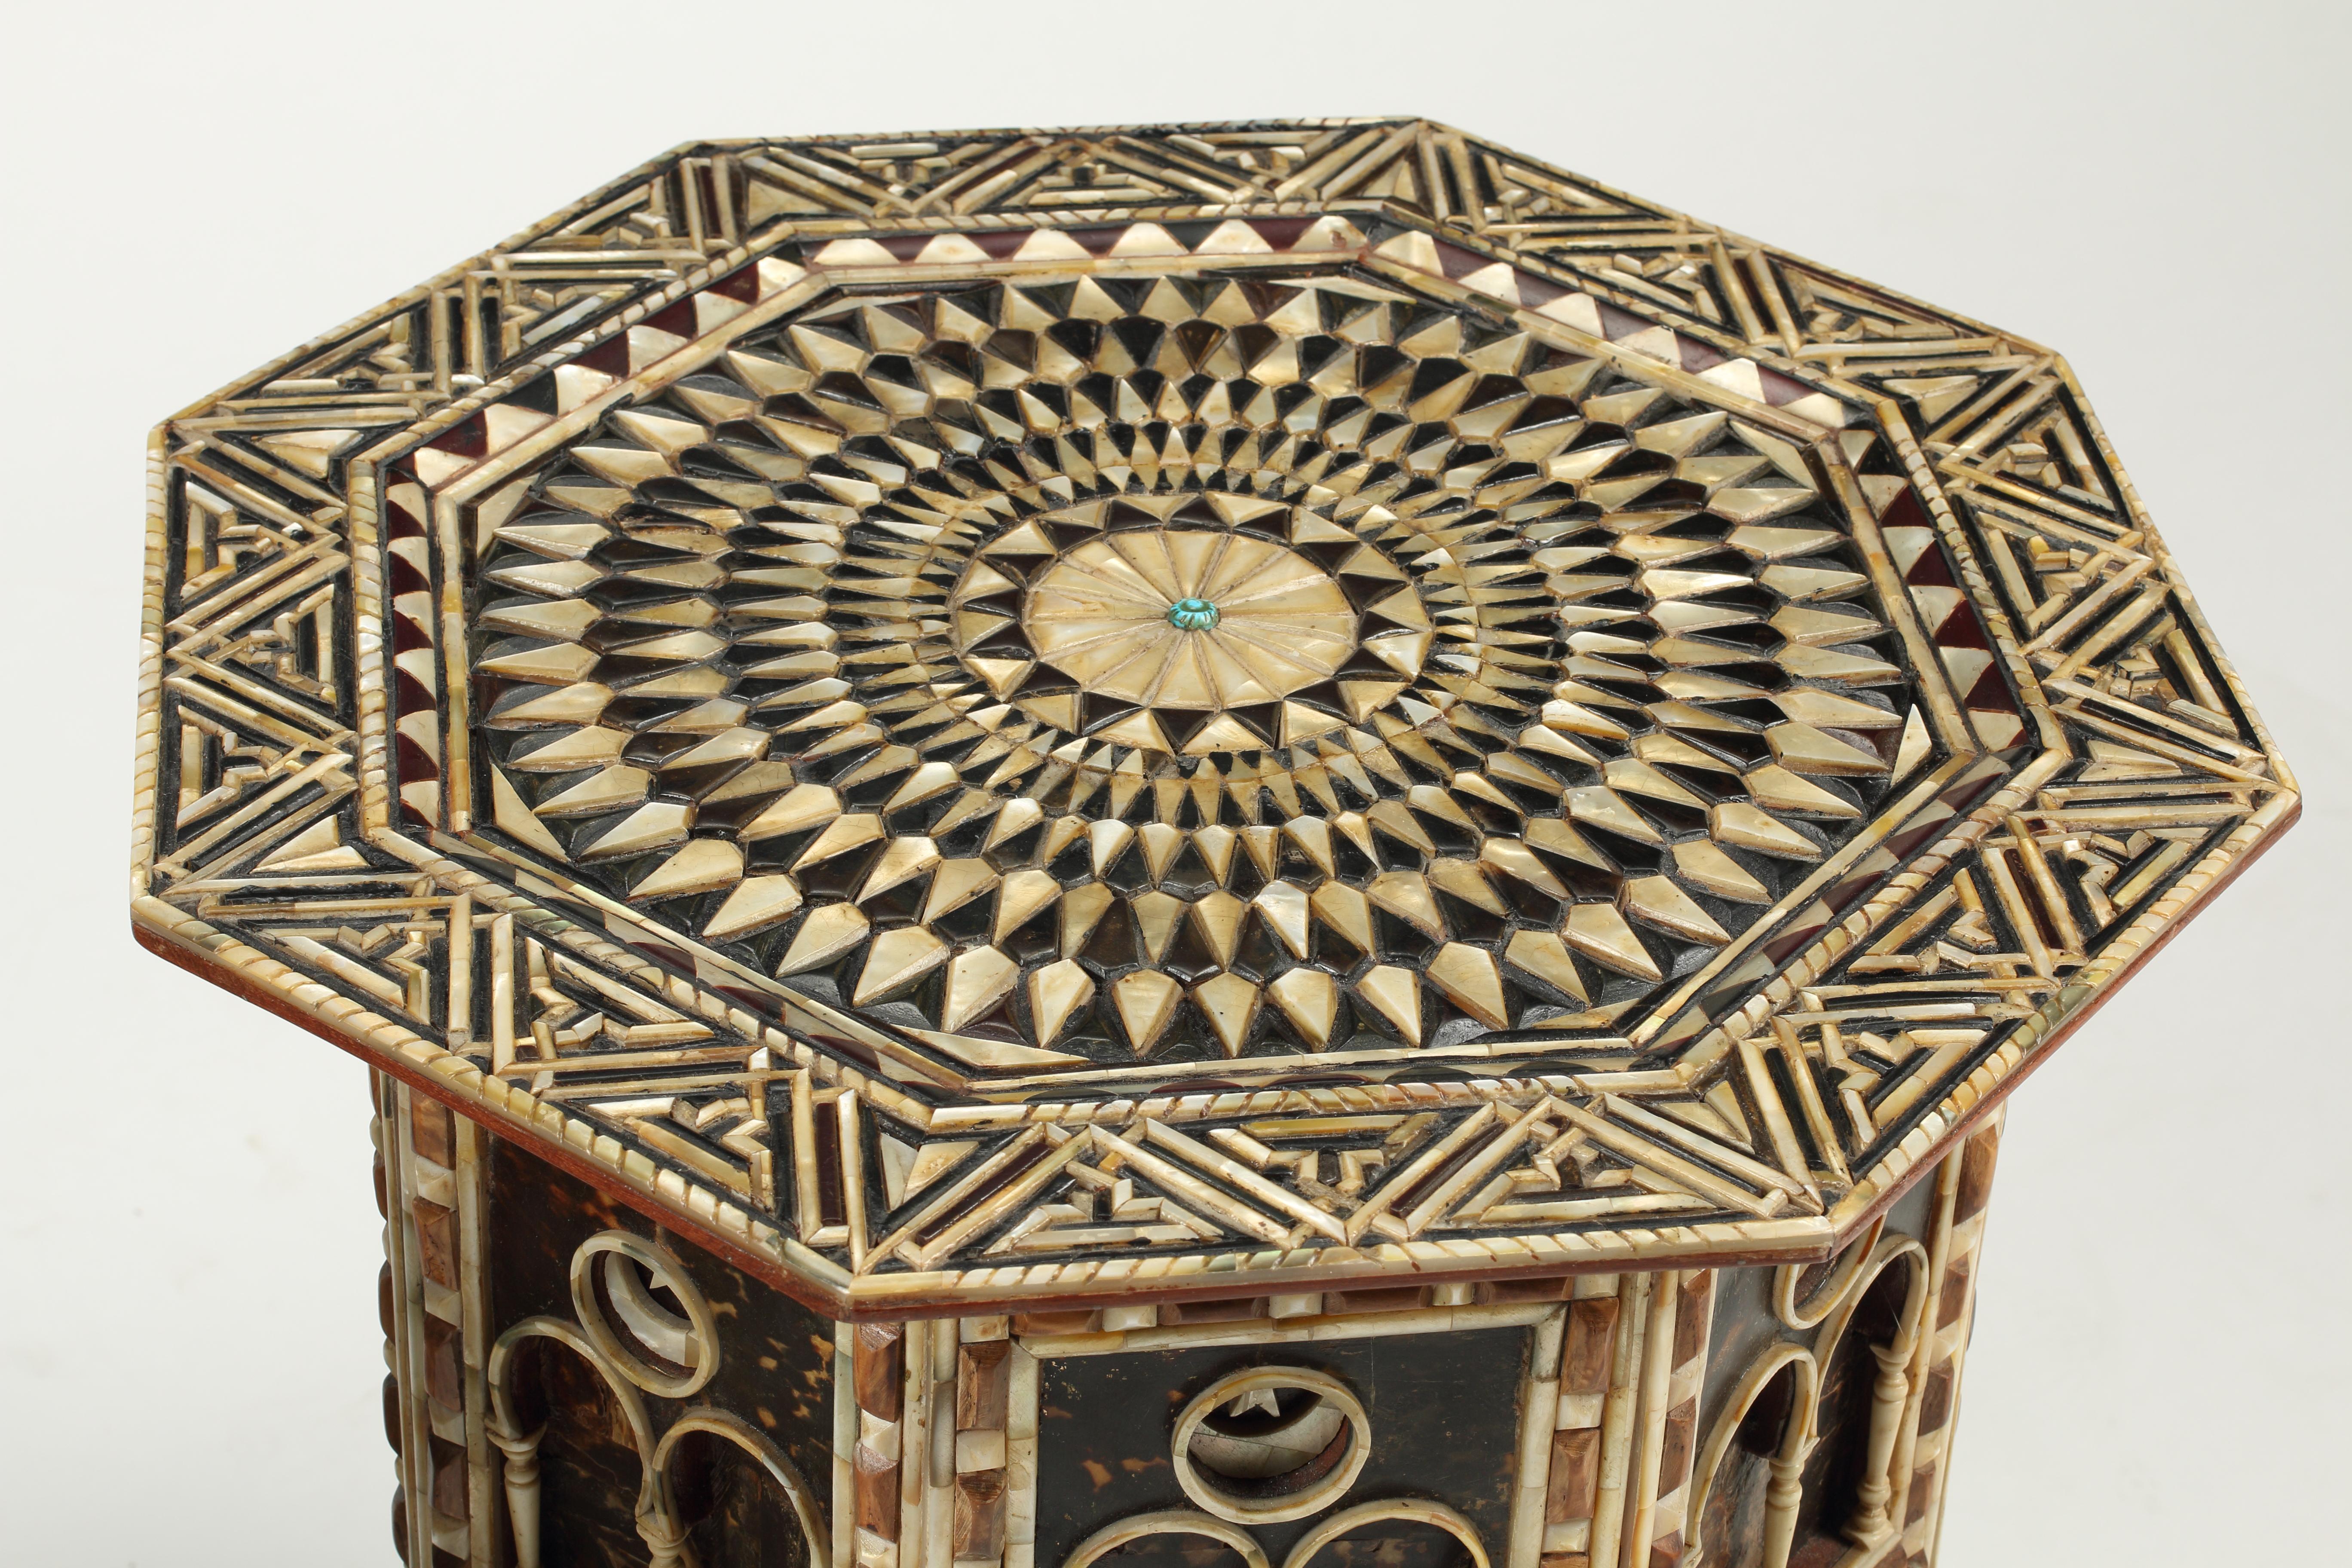 A unique pair of Levantine octagonal side tables featuring a meticulous attention to detail to intricately carved and inlaid mother of pearl, bone, and tortoiseshell design. 
While most levantine tables are inlaid into a wood veneer, this pair is